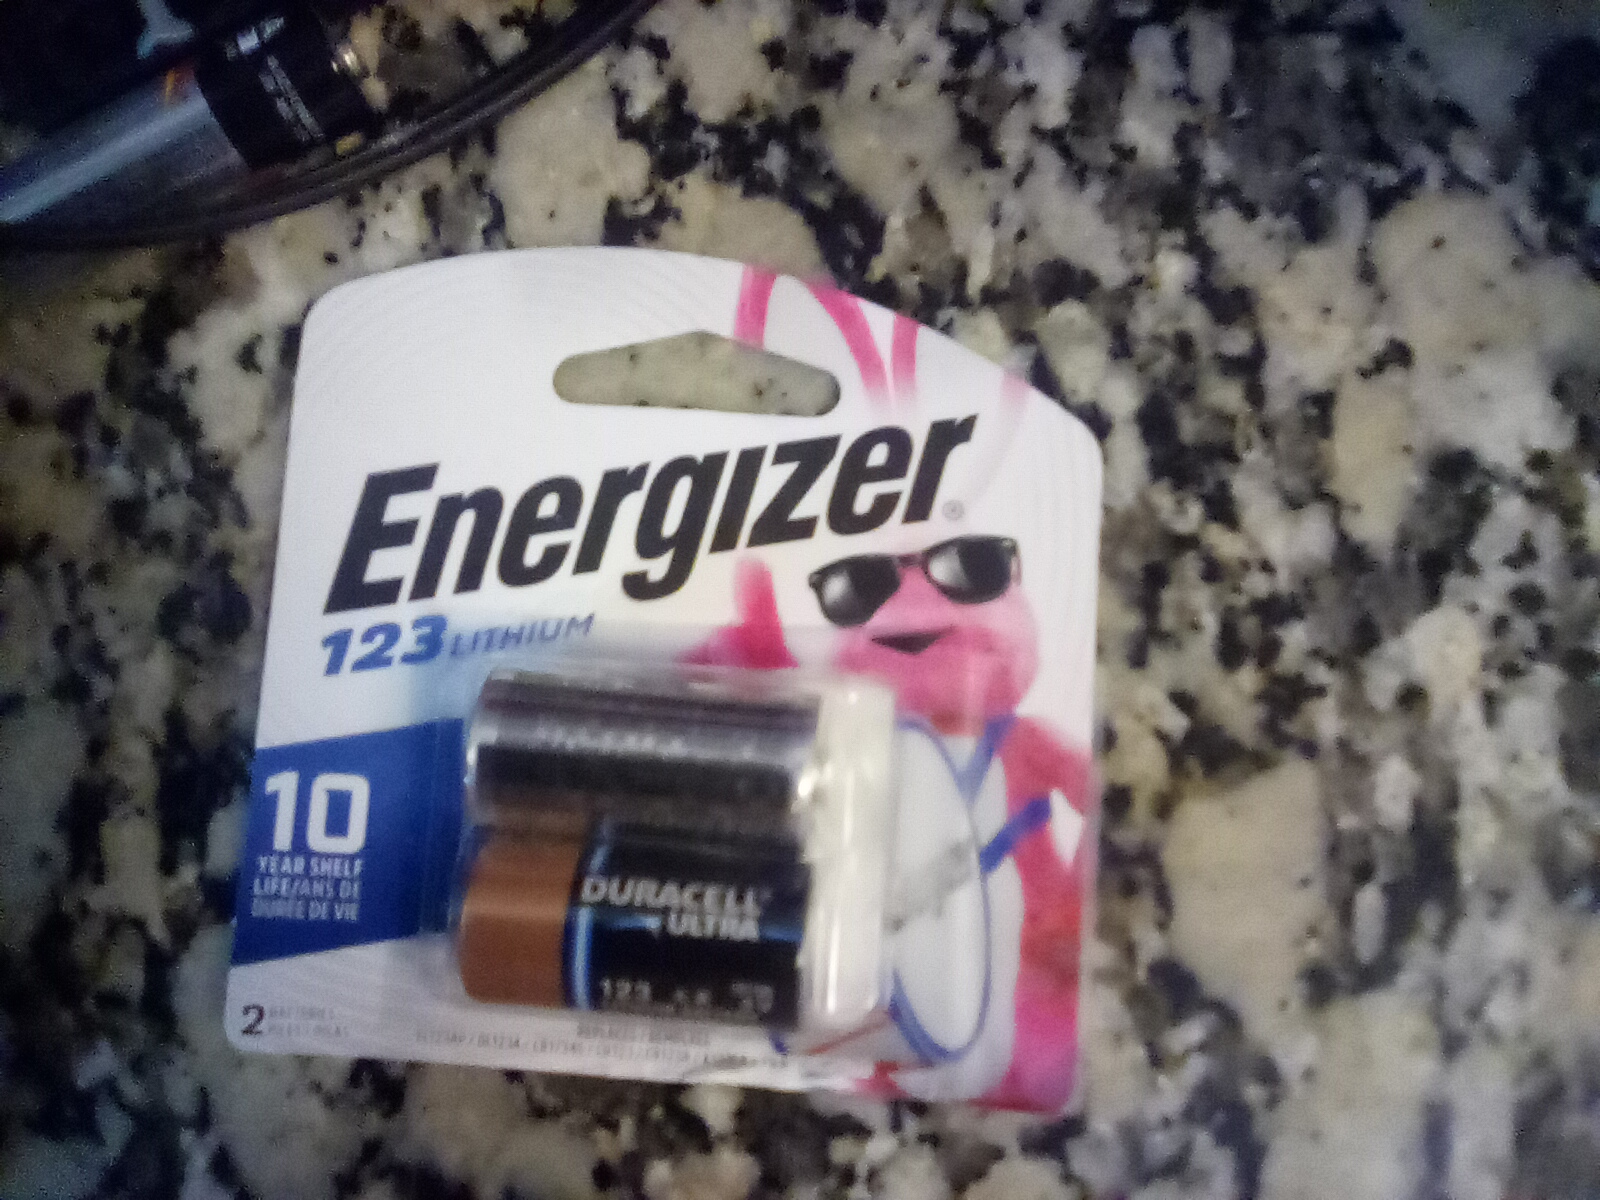 Duracell in Energizer Blank Meme Template